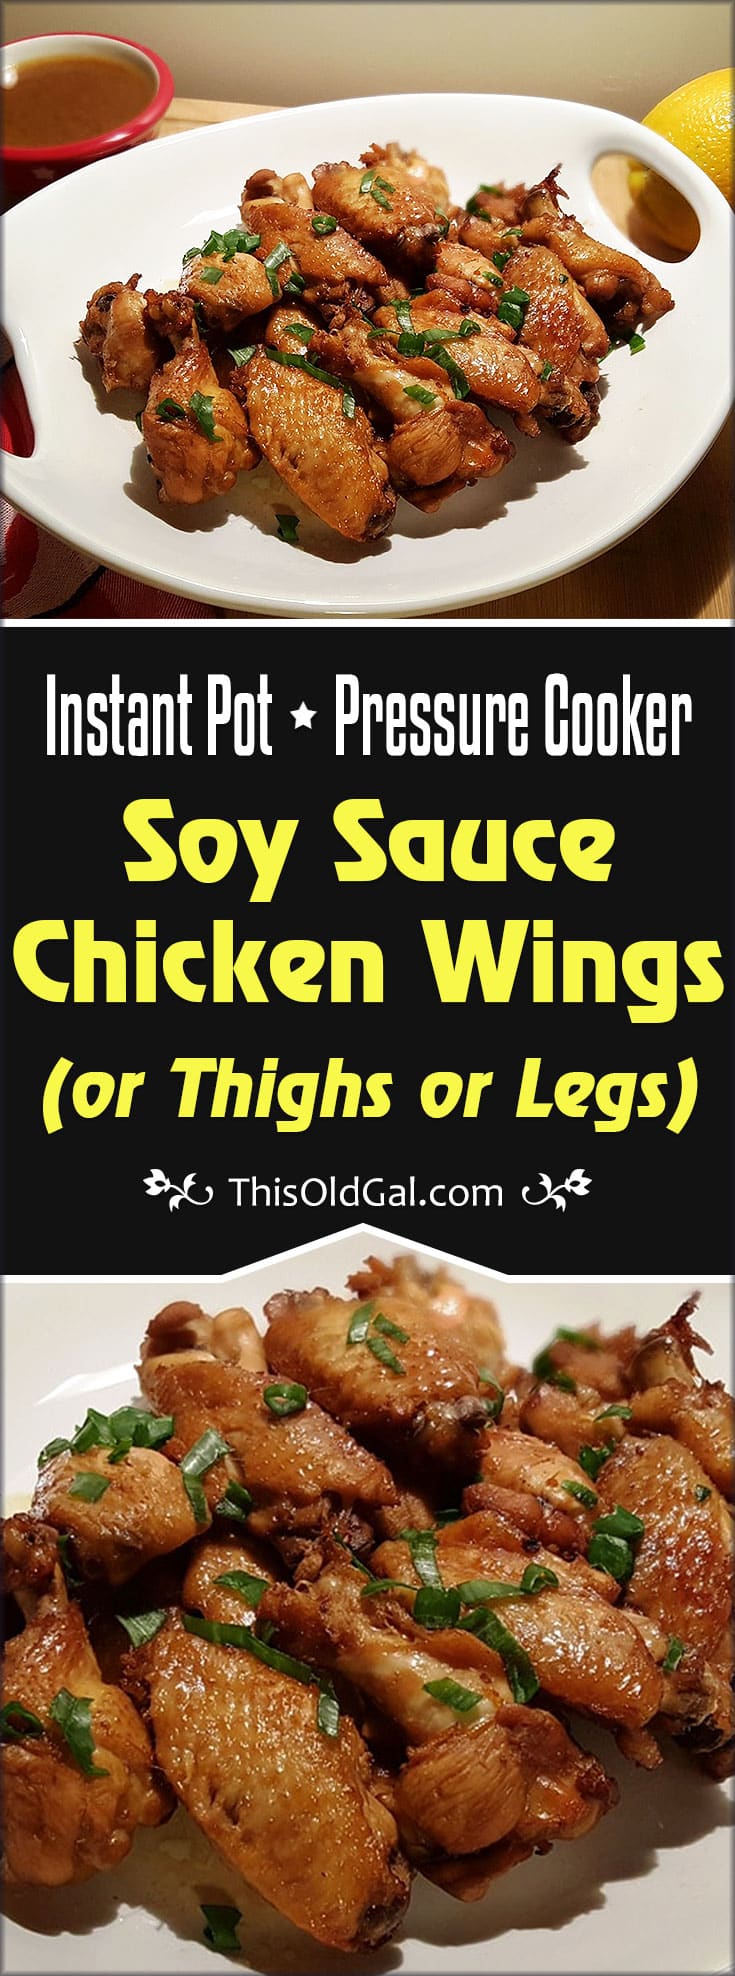 Pressure Cooker Soy Sauce Chicken Wings (or Thighs or Legs)